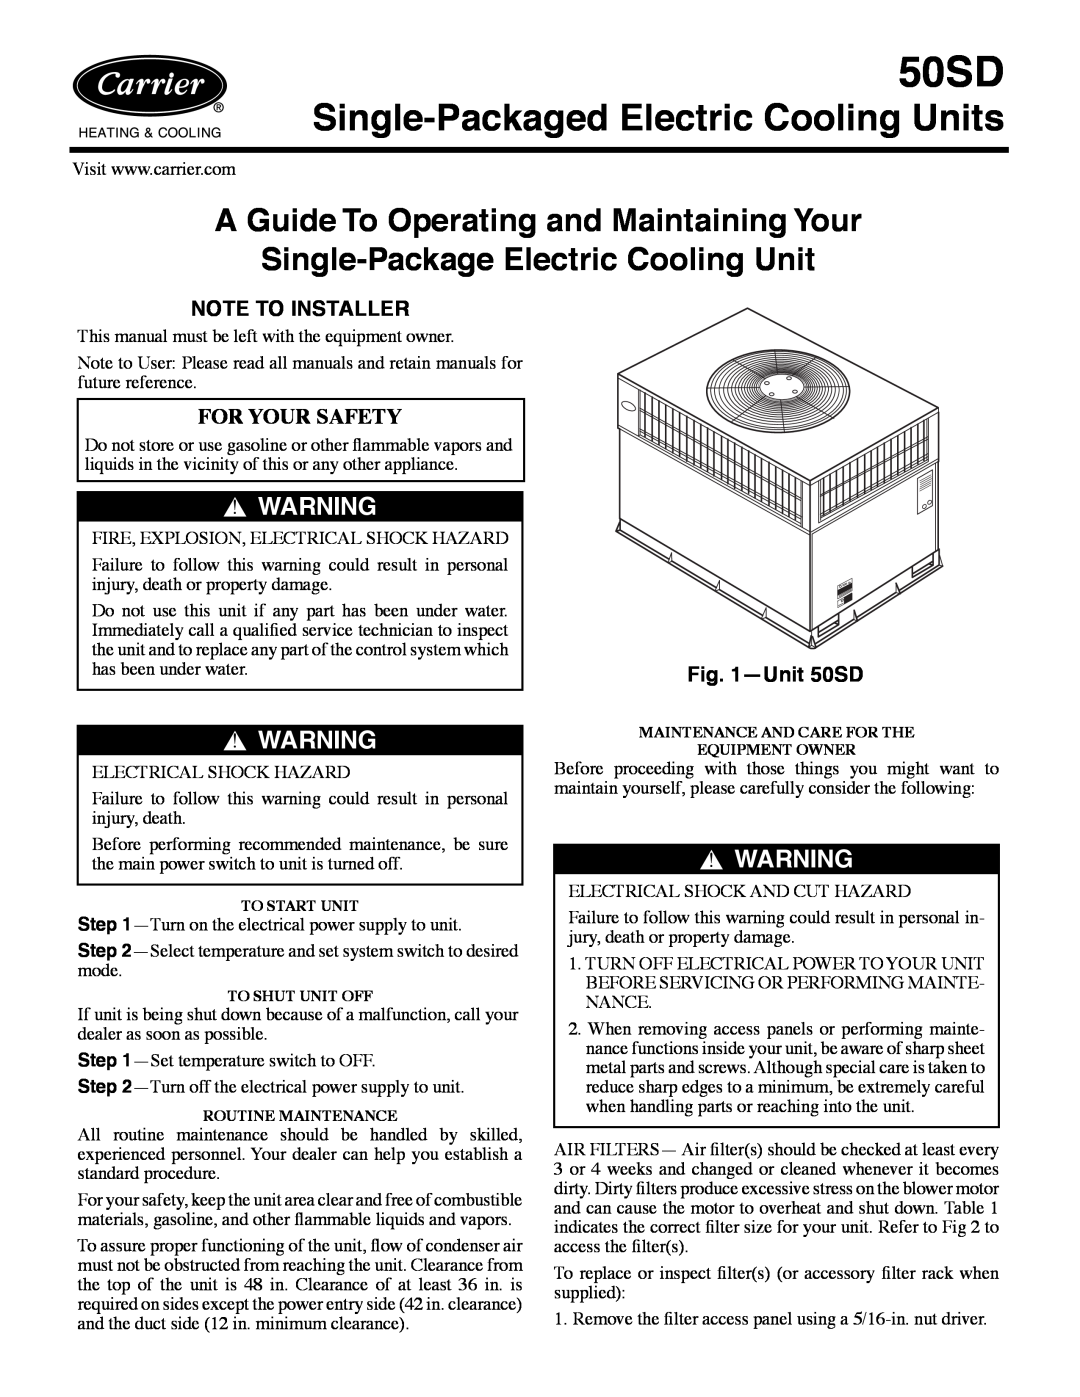 Carrier manual Note To Installer, Unit 50SD, Single-Packaged Electric Cooling Units, For Your Safety 